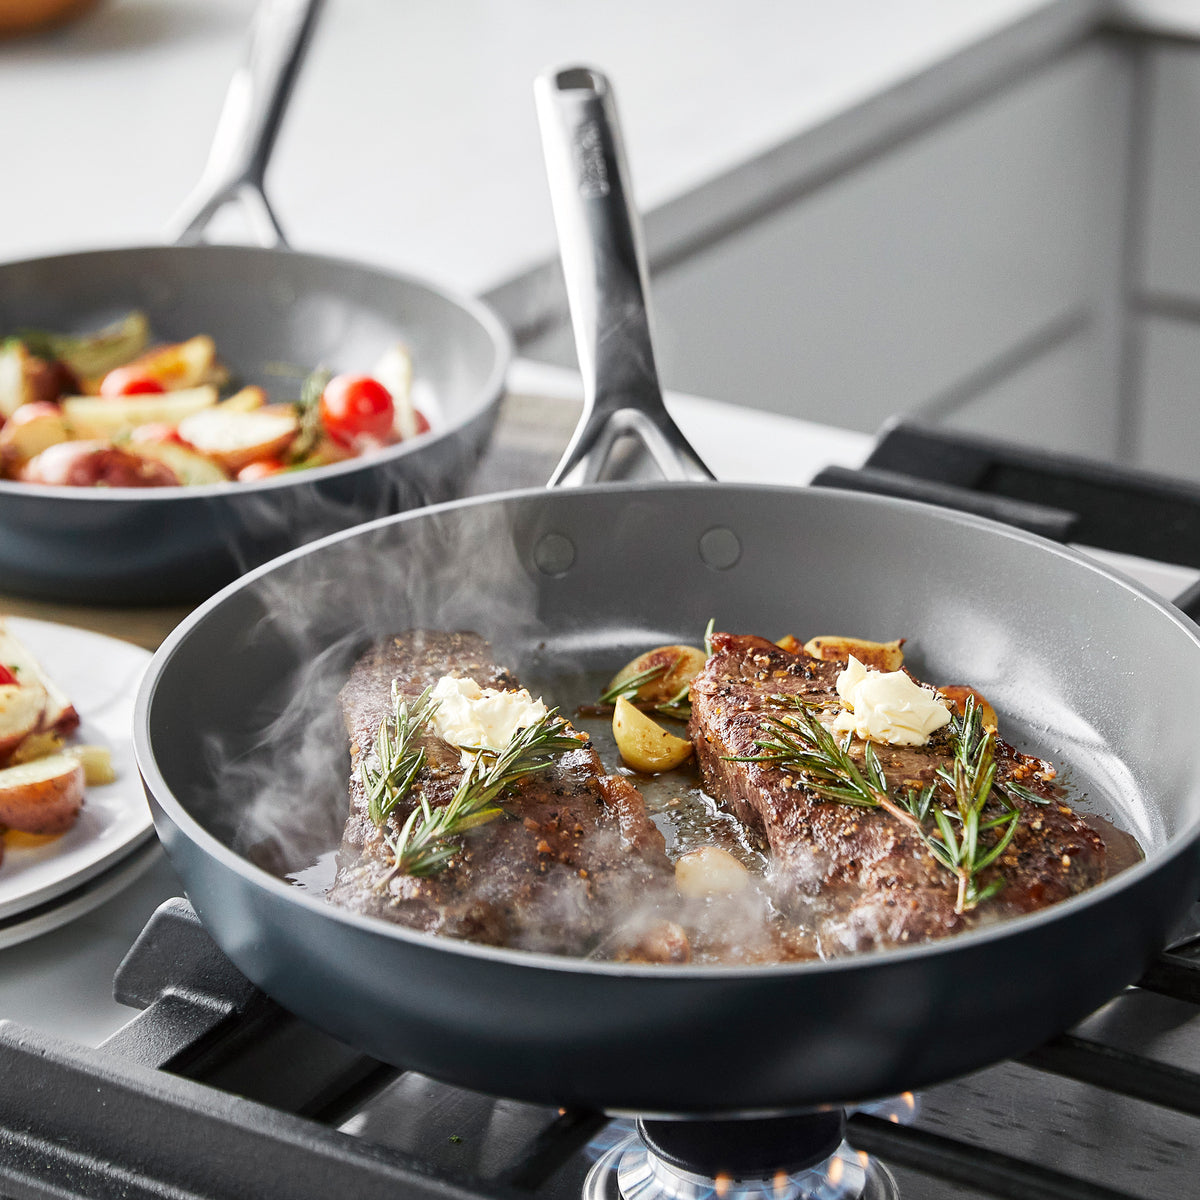 WOLL Cast High Edge Pan 9 3/8in Nowo Titanium Induction Frying Pan